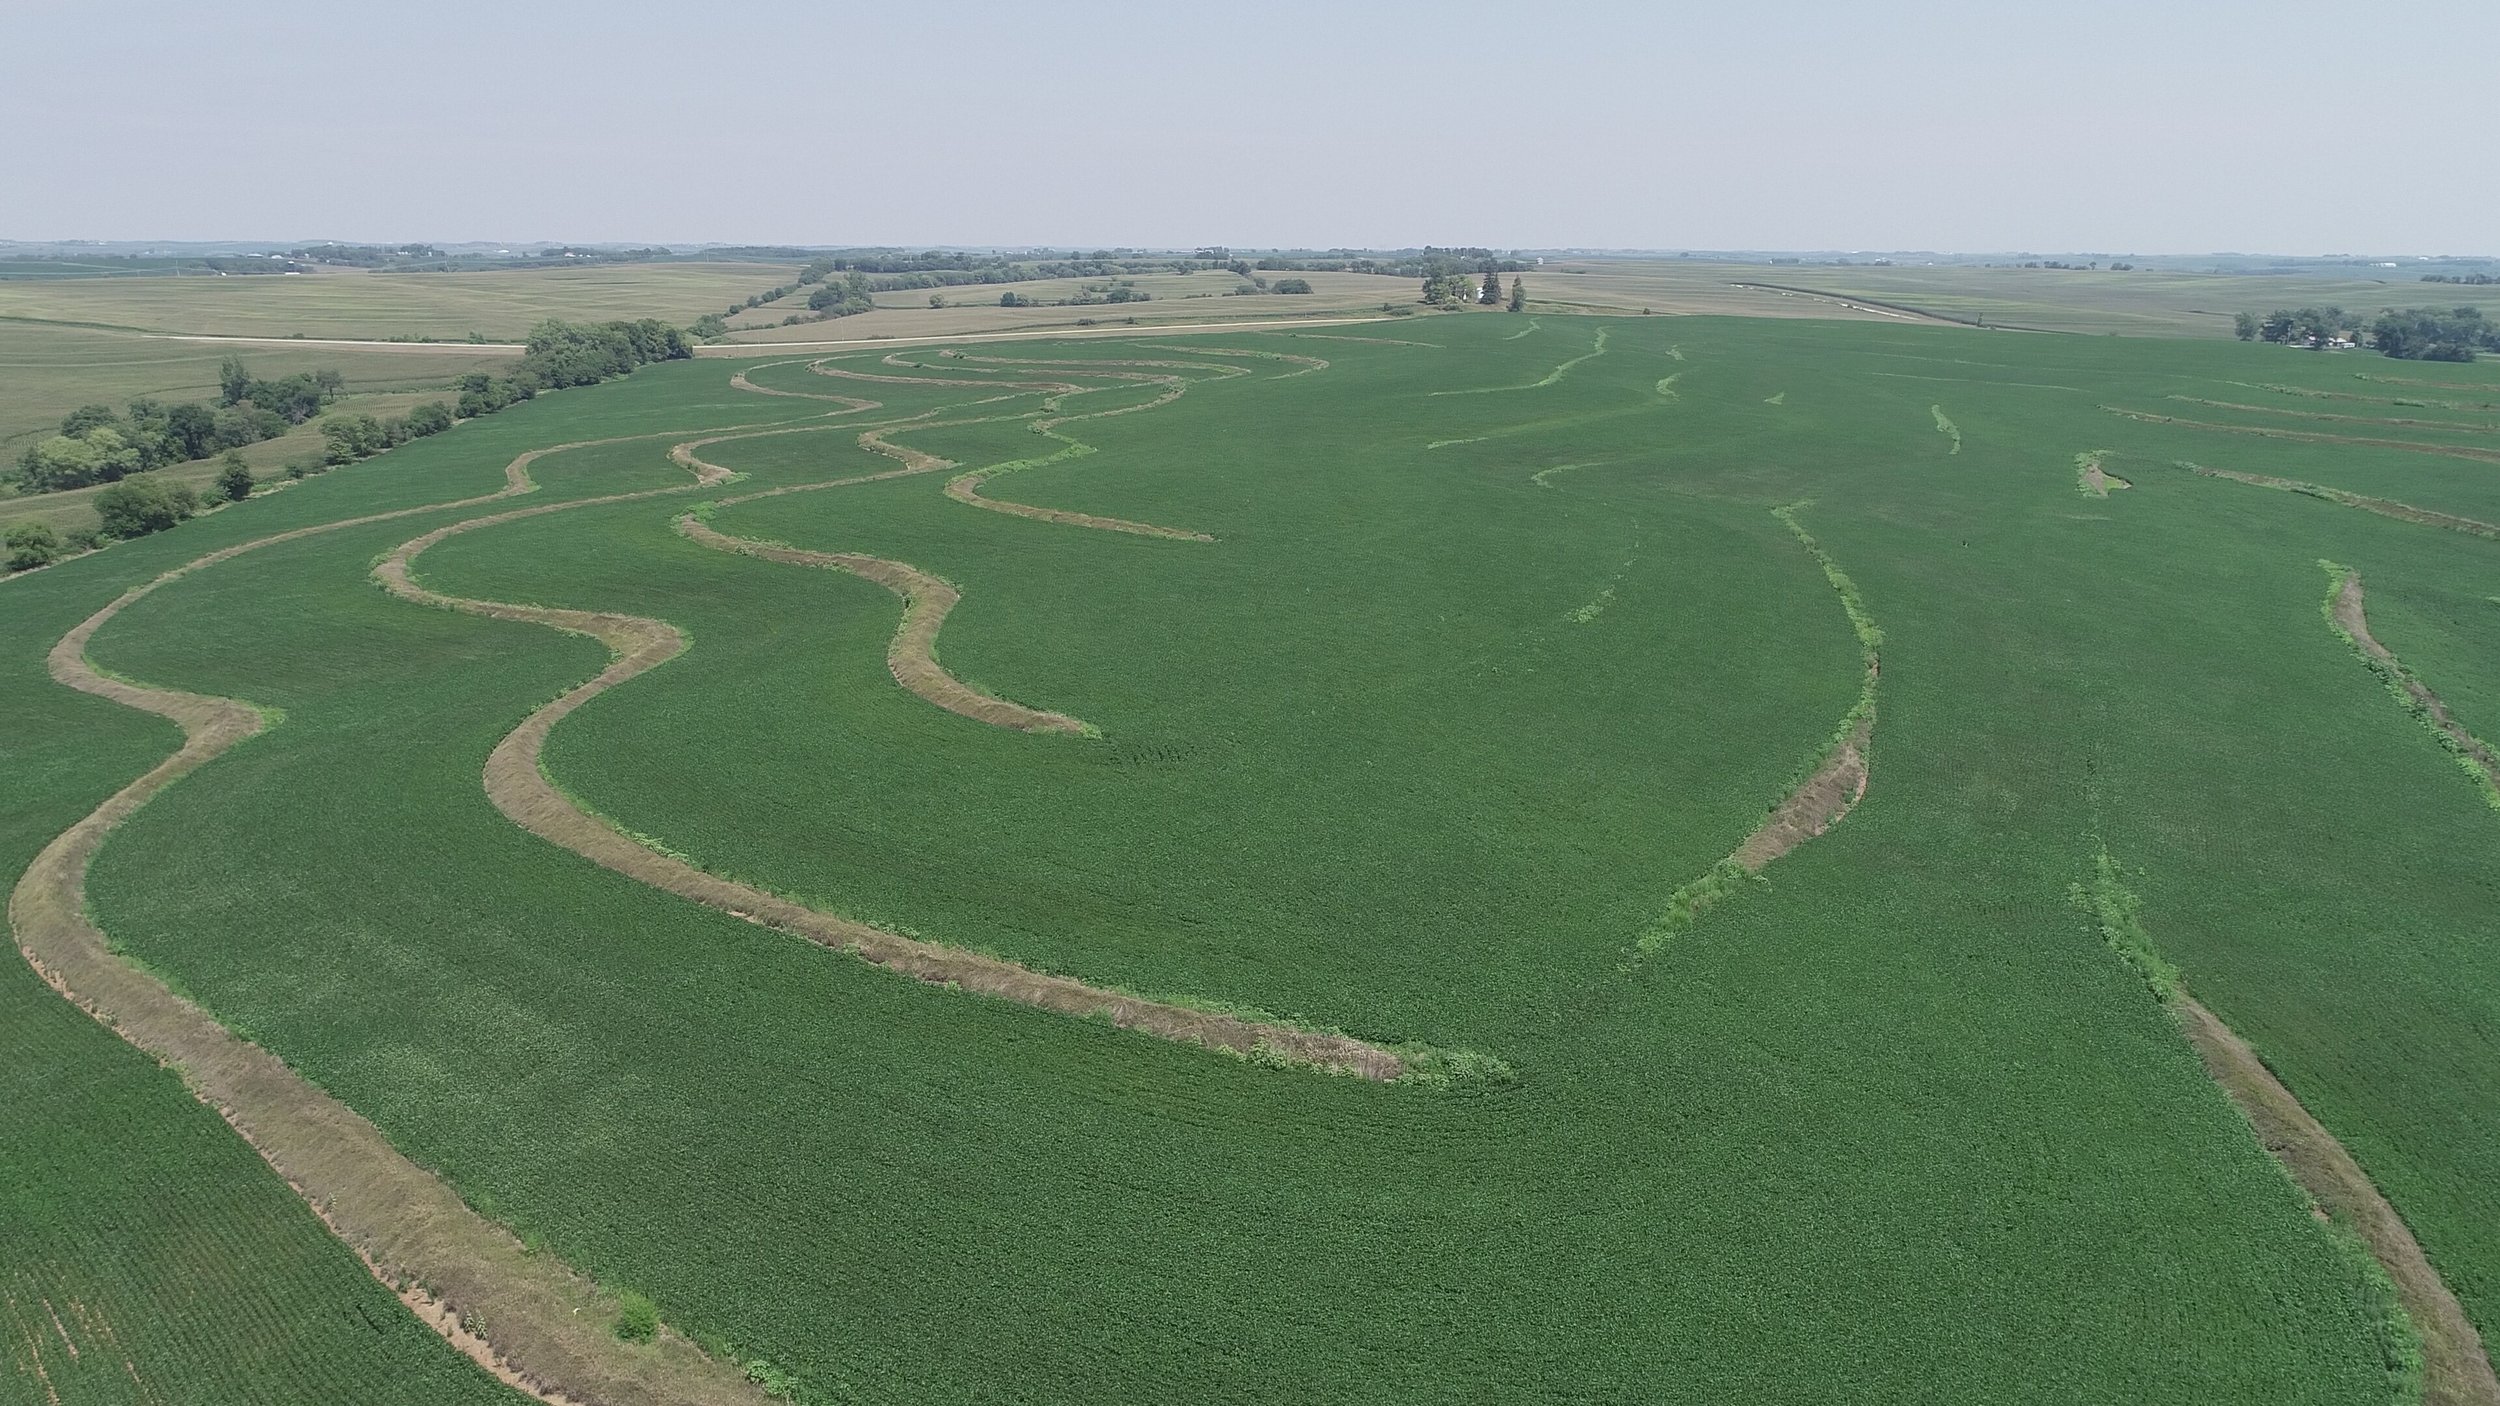 View of Field Planted in Soybeans (July 22, 2018)